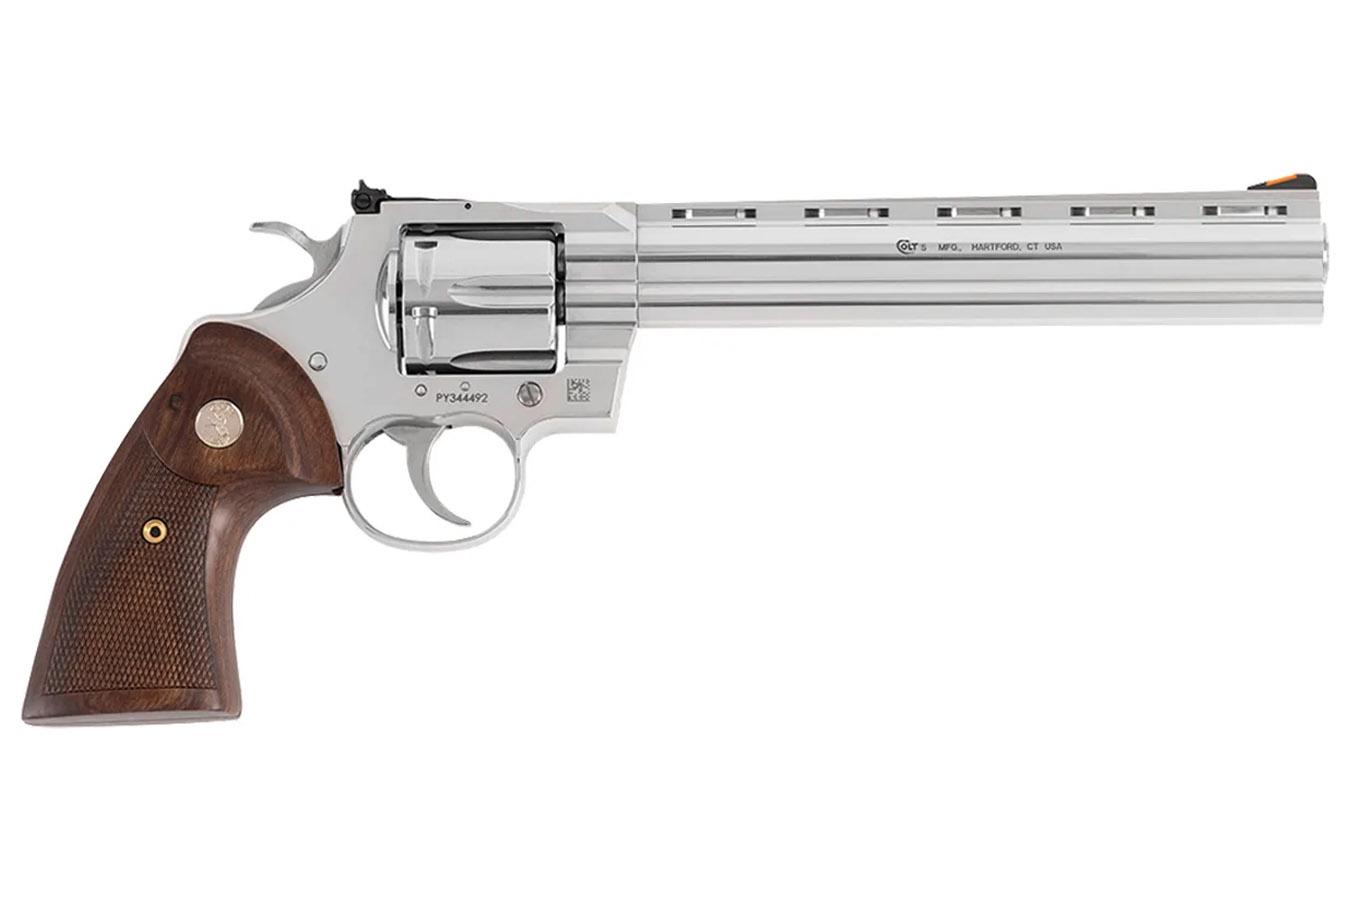 No. 14 Best Selling: COLT PYTHON 357 6 SHOT 8 IN BBL WOOD GRIPS